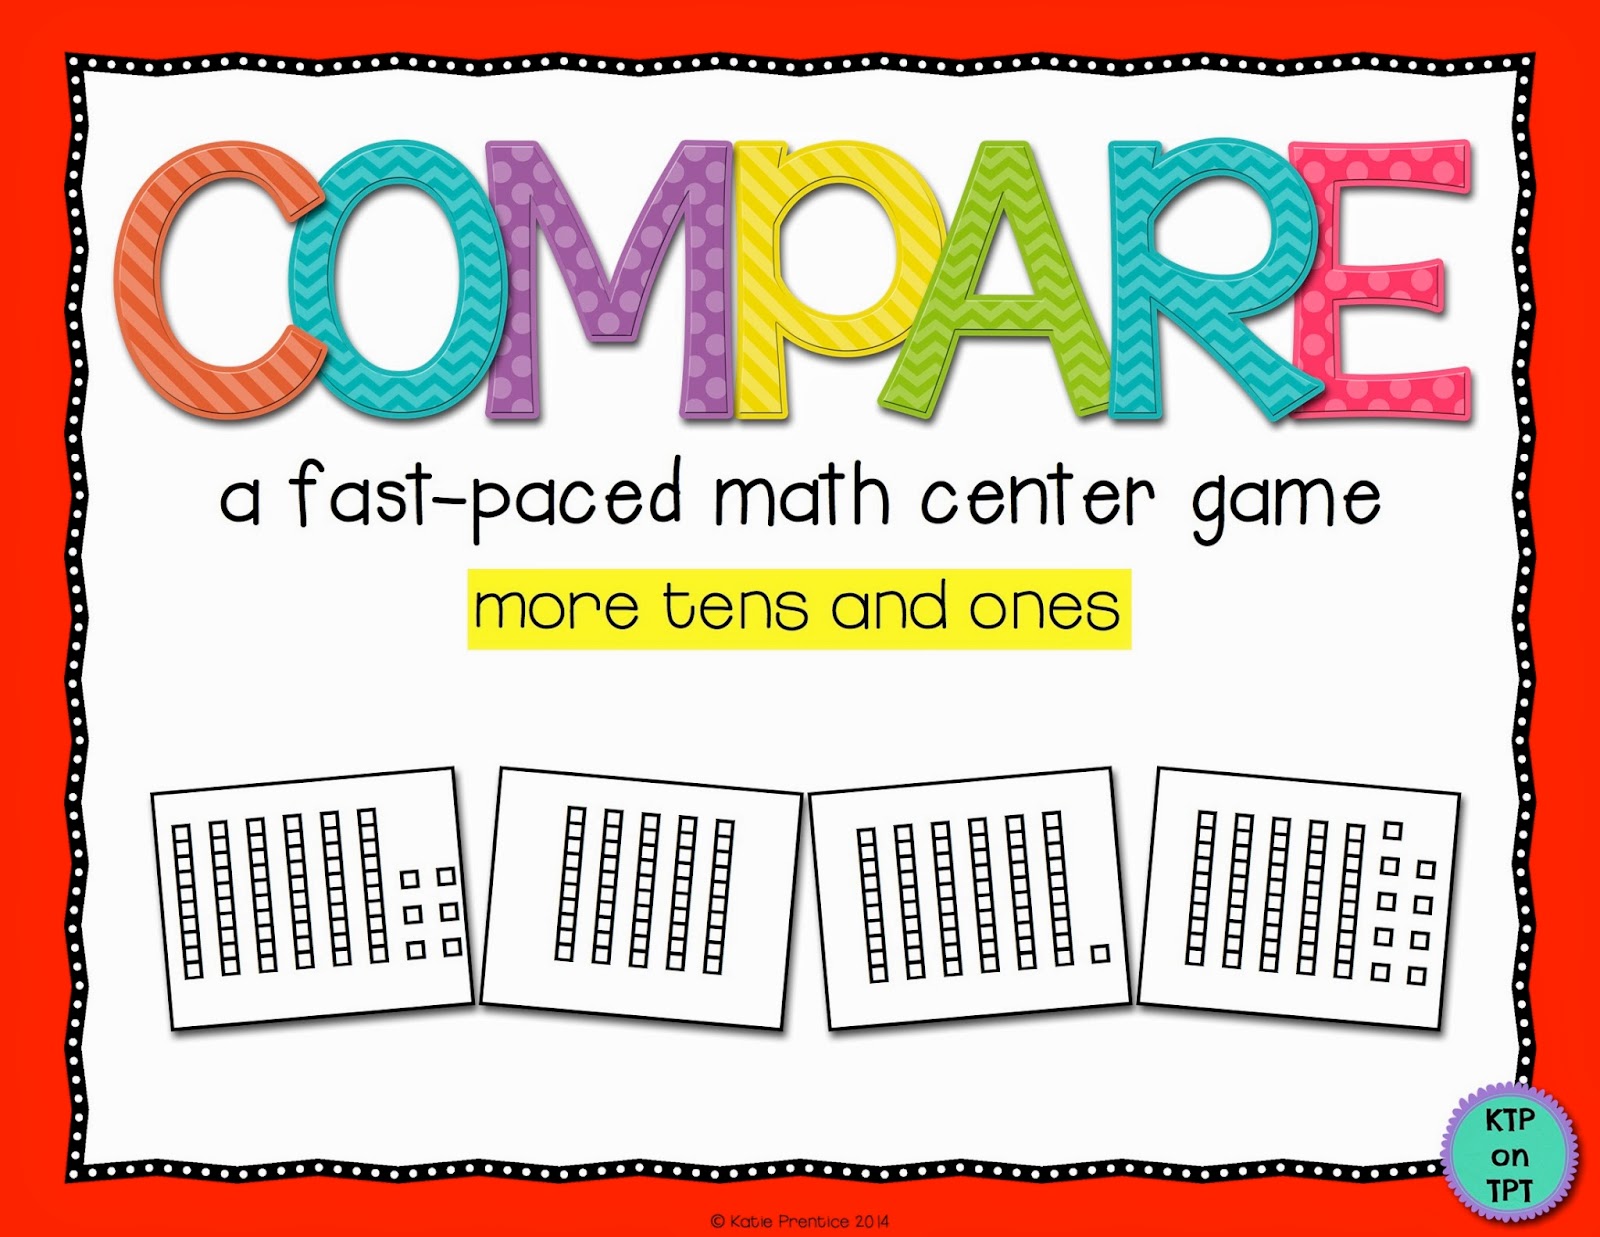 http://www.teacherspayteachers.com/Product/Compare-MORE-tens-and-ones-game-for-math-centers-1142063